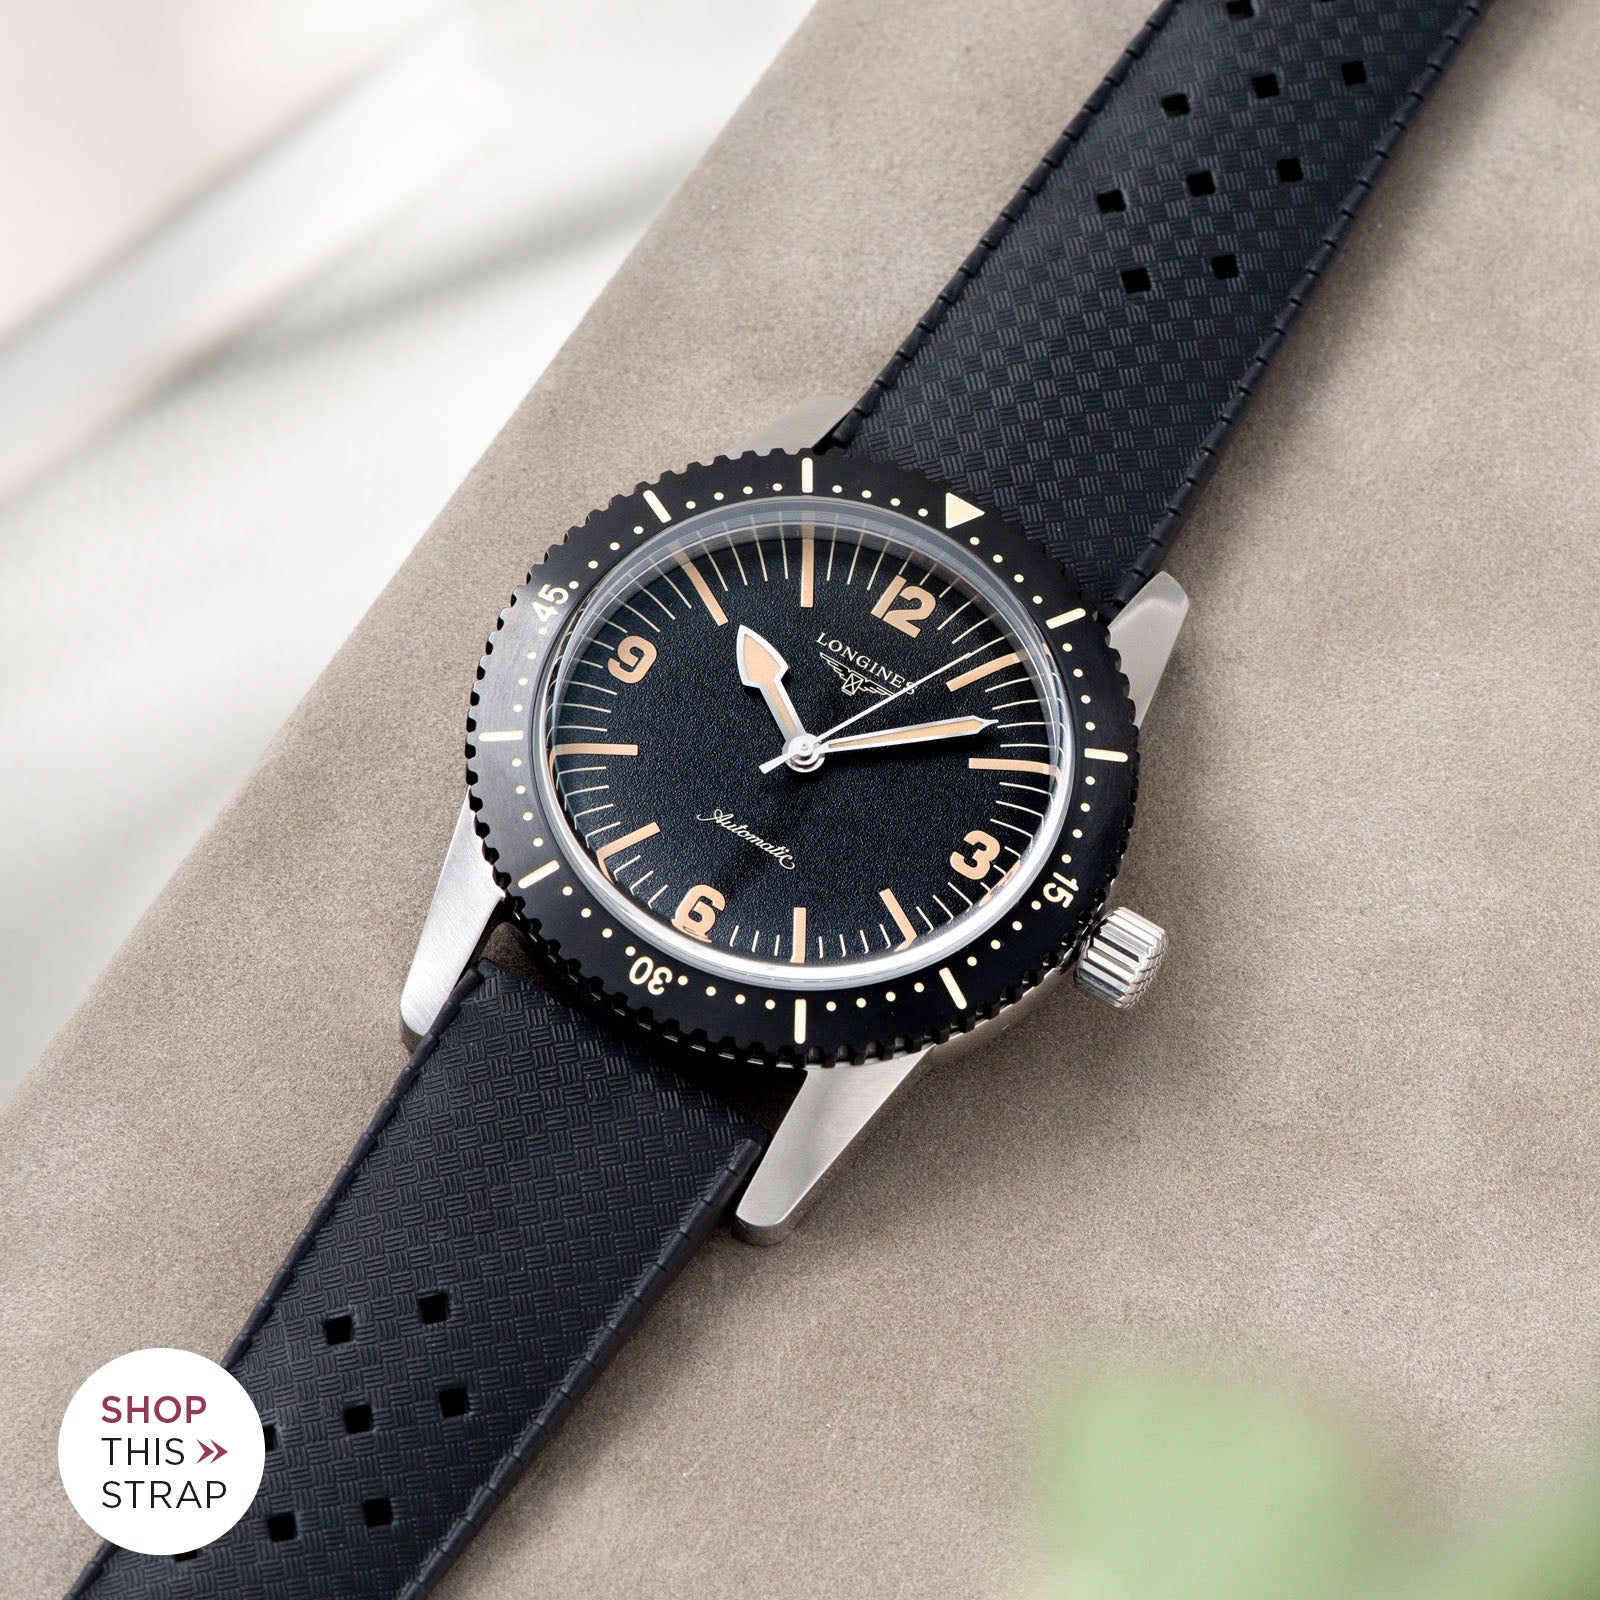 Bulang and Sons_Strap Guide_Longines Skin Diver__Nautic Basket Weave Black Rubber Watch Strap